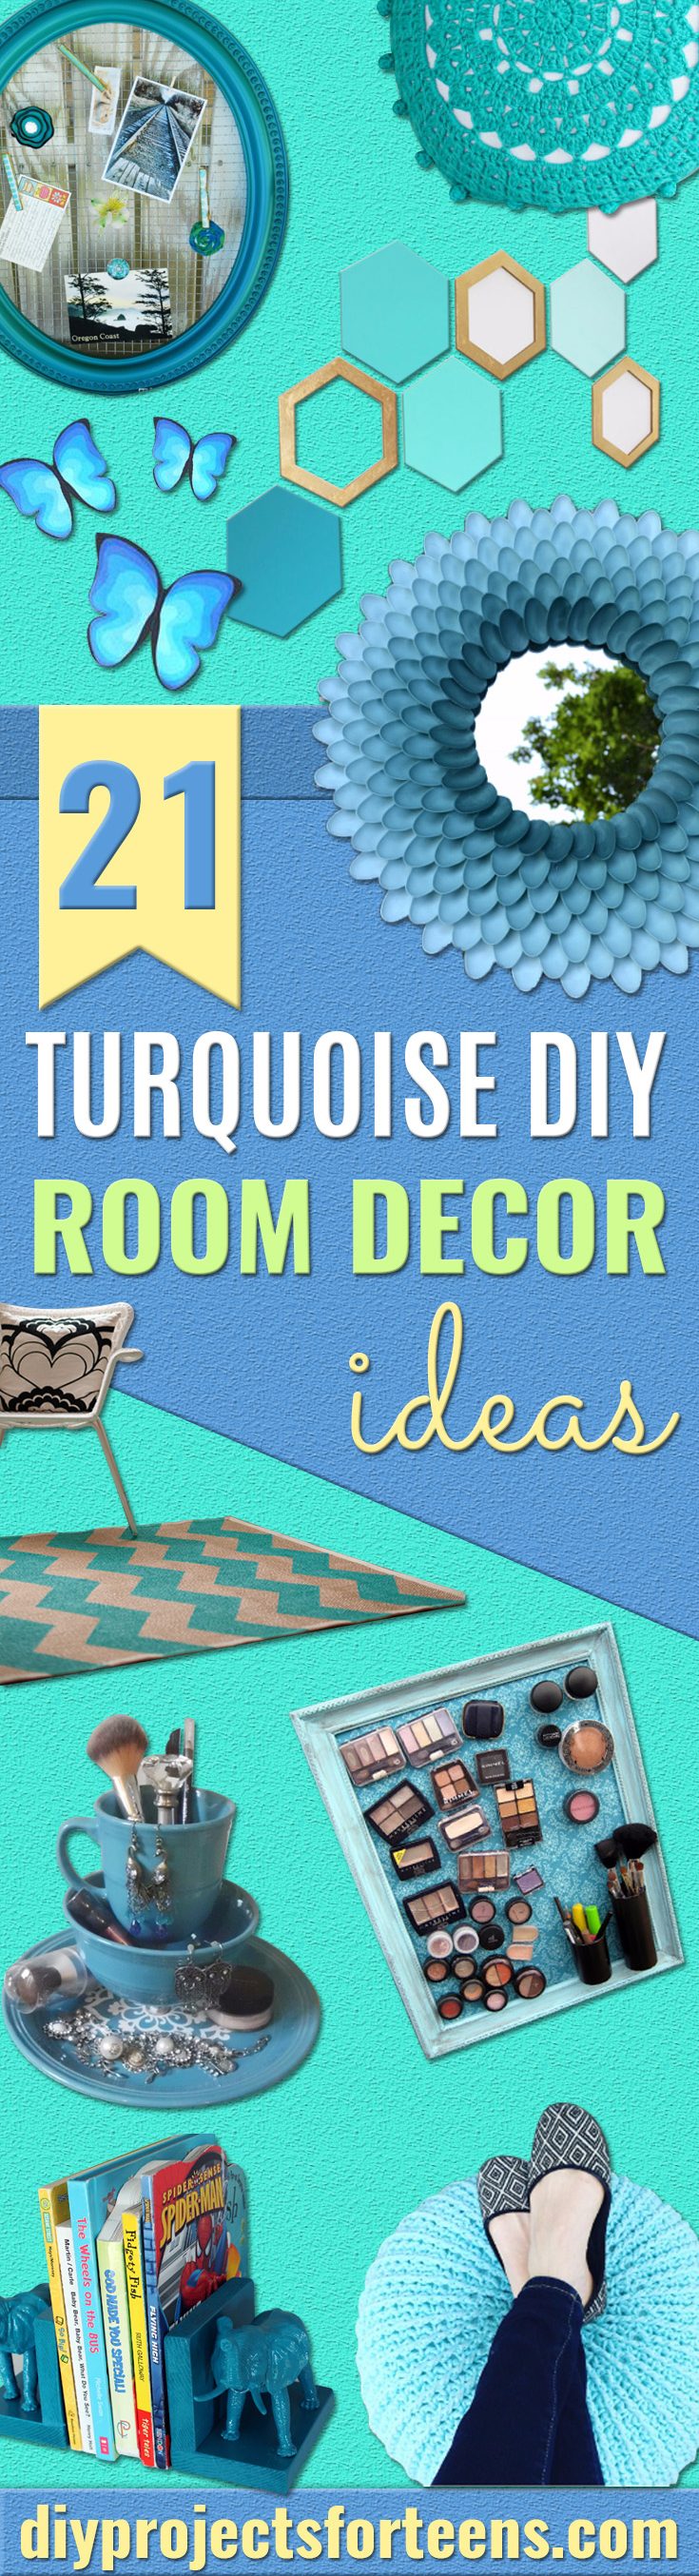 Cool Turquoise Room Decor Ideas - Fun Aqua Decorating Looks and Color for Teen Bedroom, Bathroom, Accent Walls and Home Decor - Fun Crafts and Wall Art for Your Room 